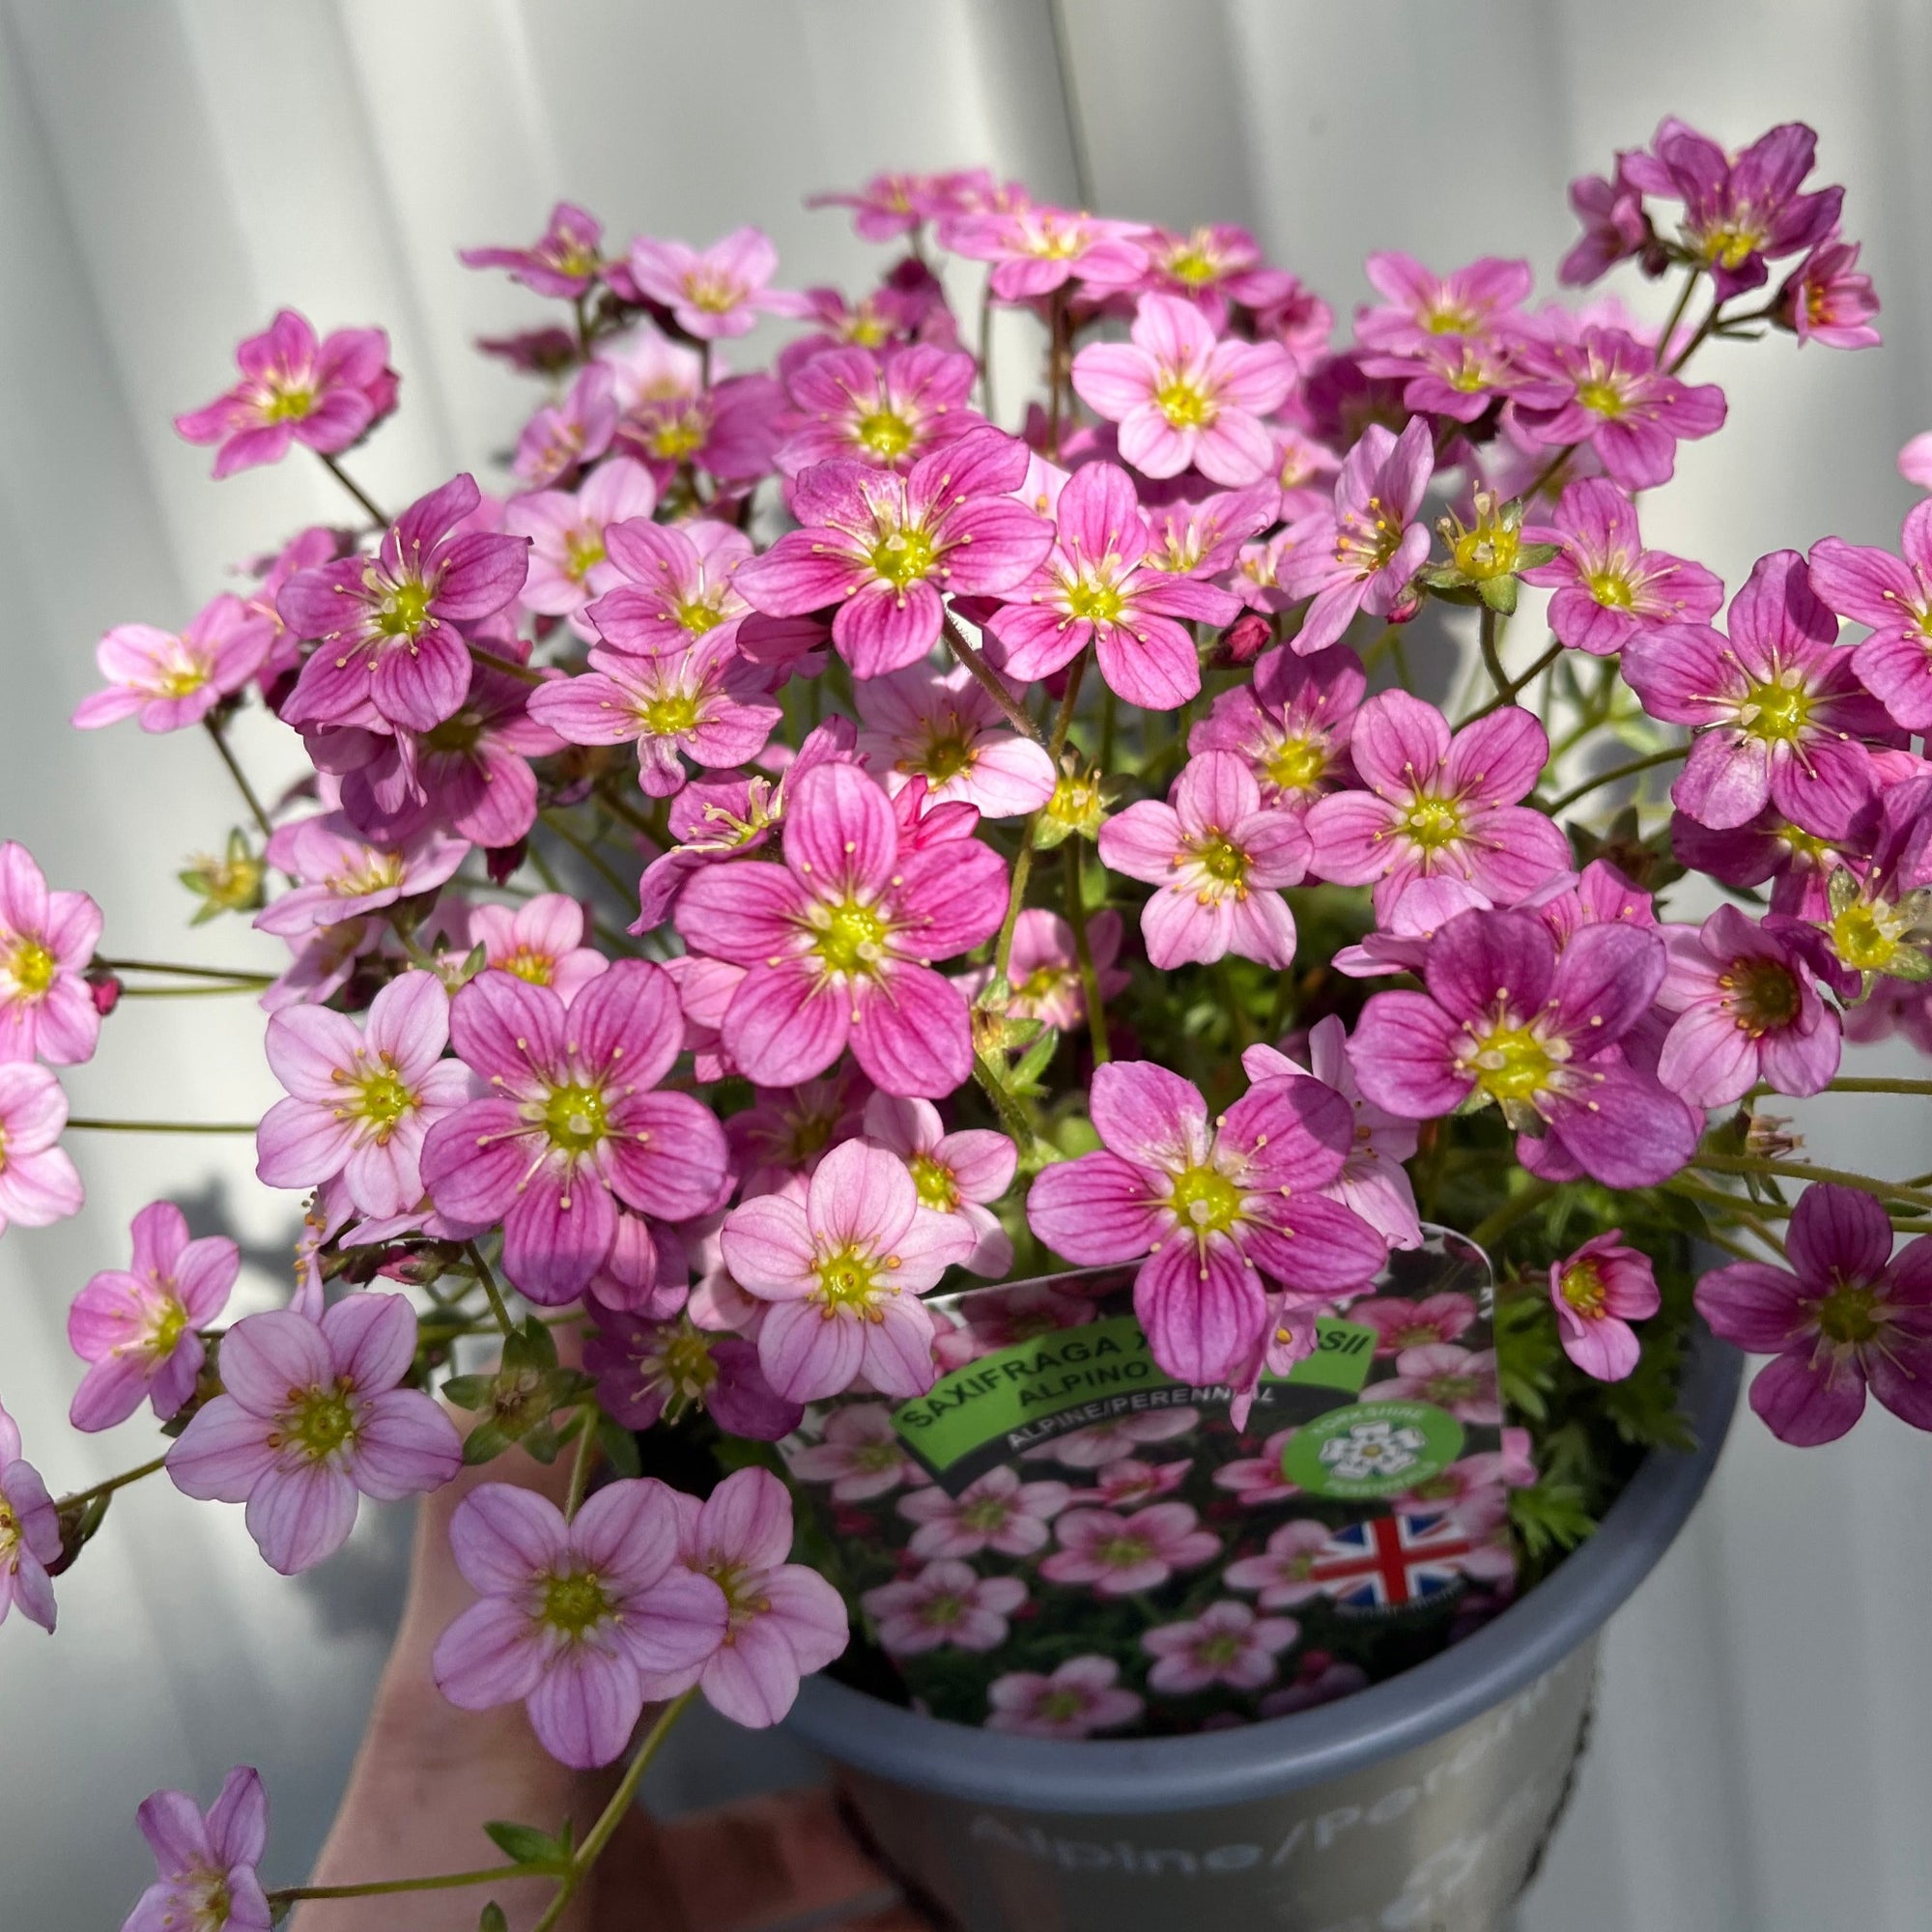 SPECIAL OFFER: Saxifraga - Pixie Mix of 5